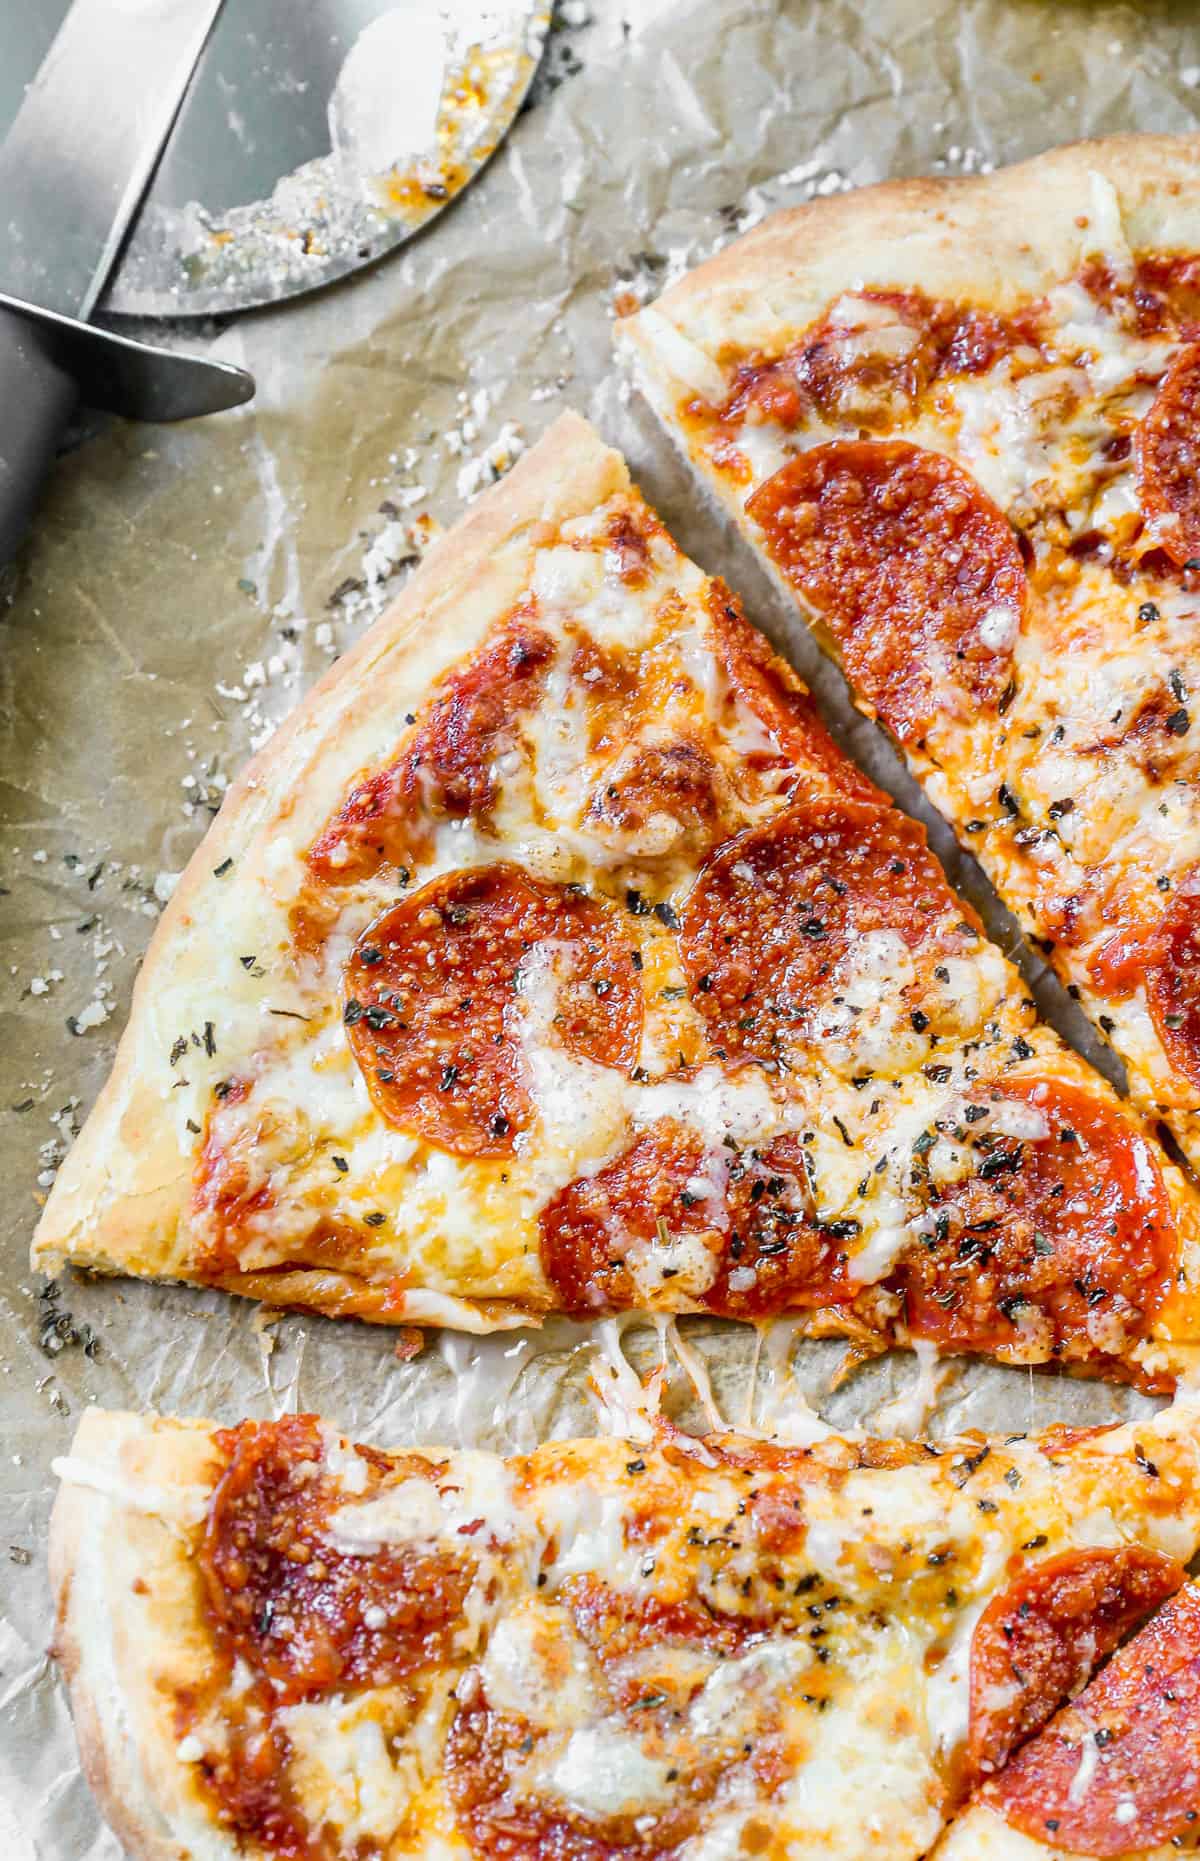 A close-up image of a homemade easy pepperoni pizza, ready to enjoy.